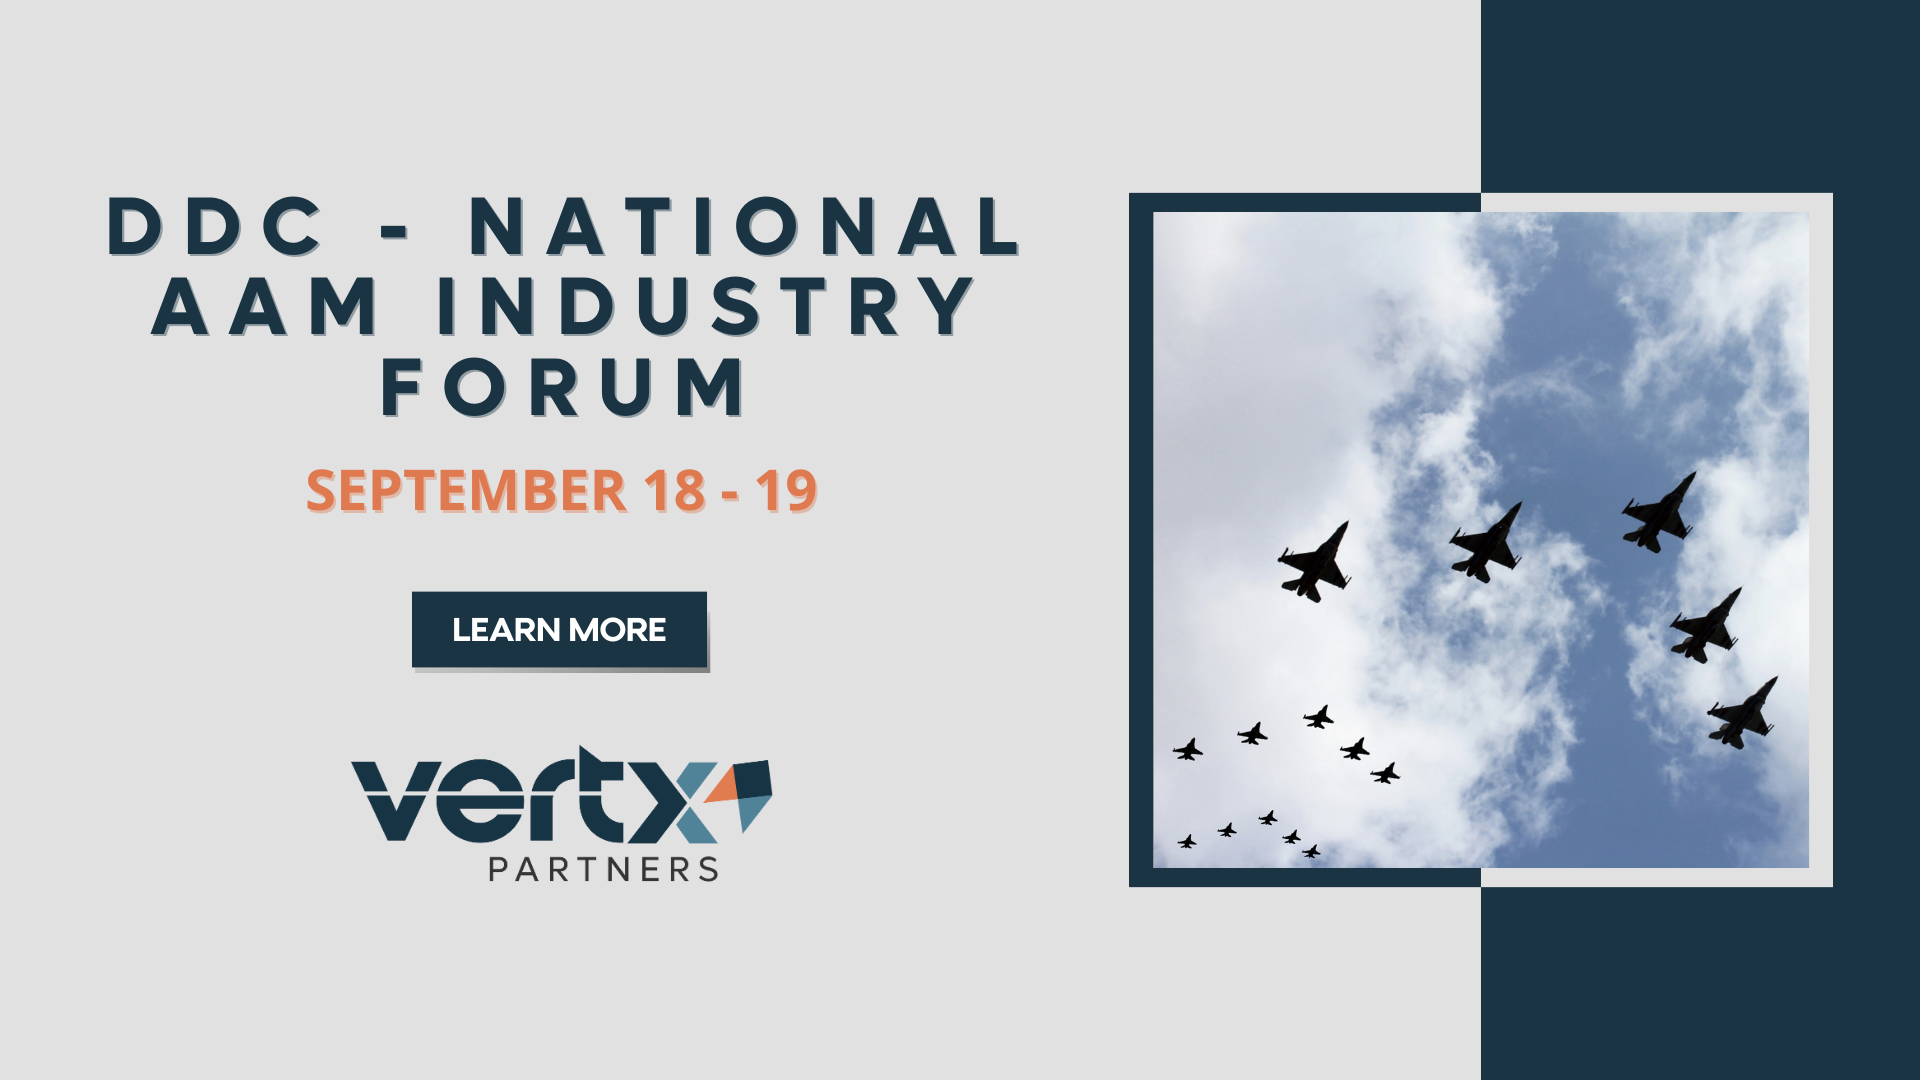 This graphic has the title "DDC - National AAM Industry Forum" with the dates september 18 - 19 and a photo of 5 planes to the right of that.